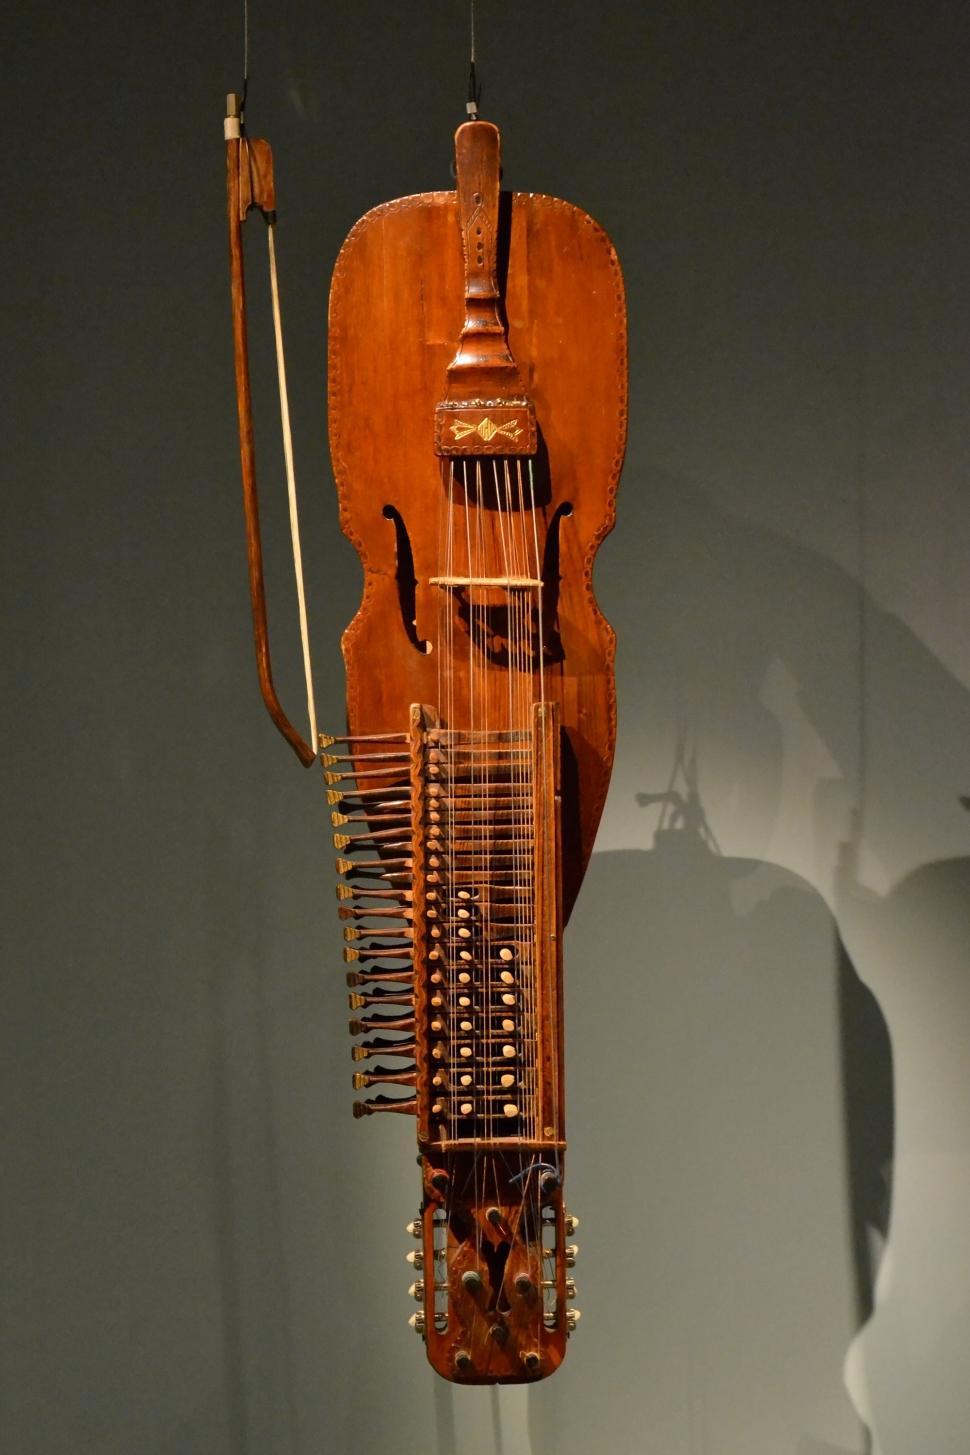 Free Image of String instrument 